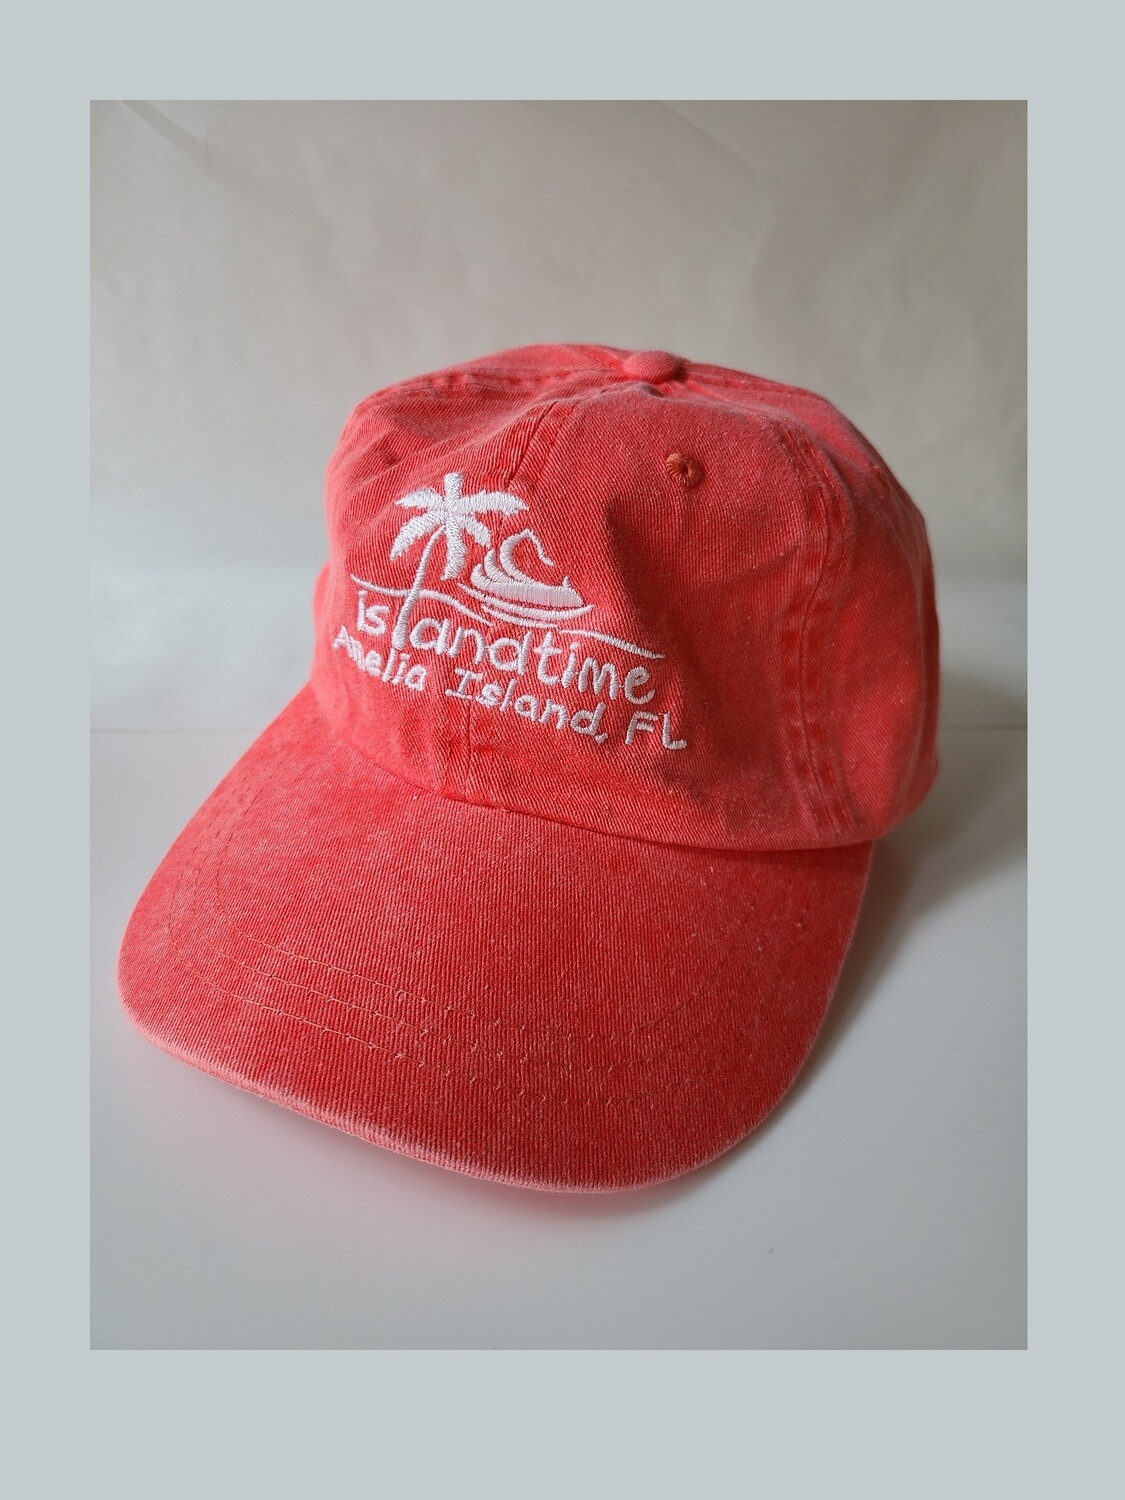 Baseball Cap 1 - Color Pink - One Size Fits All